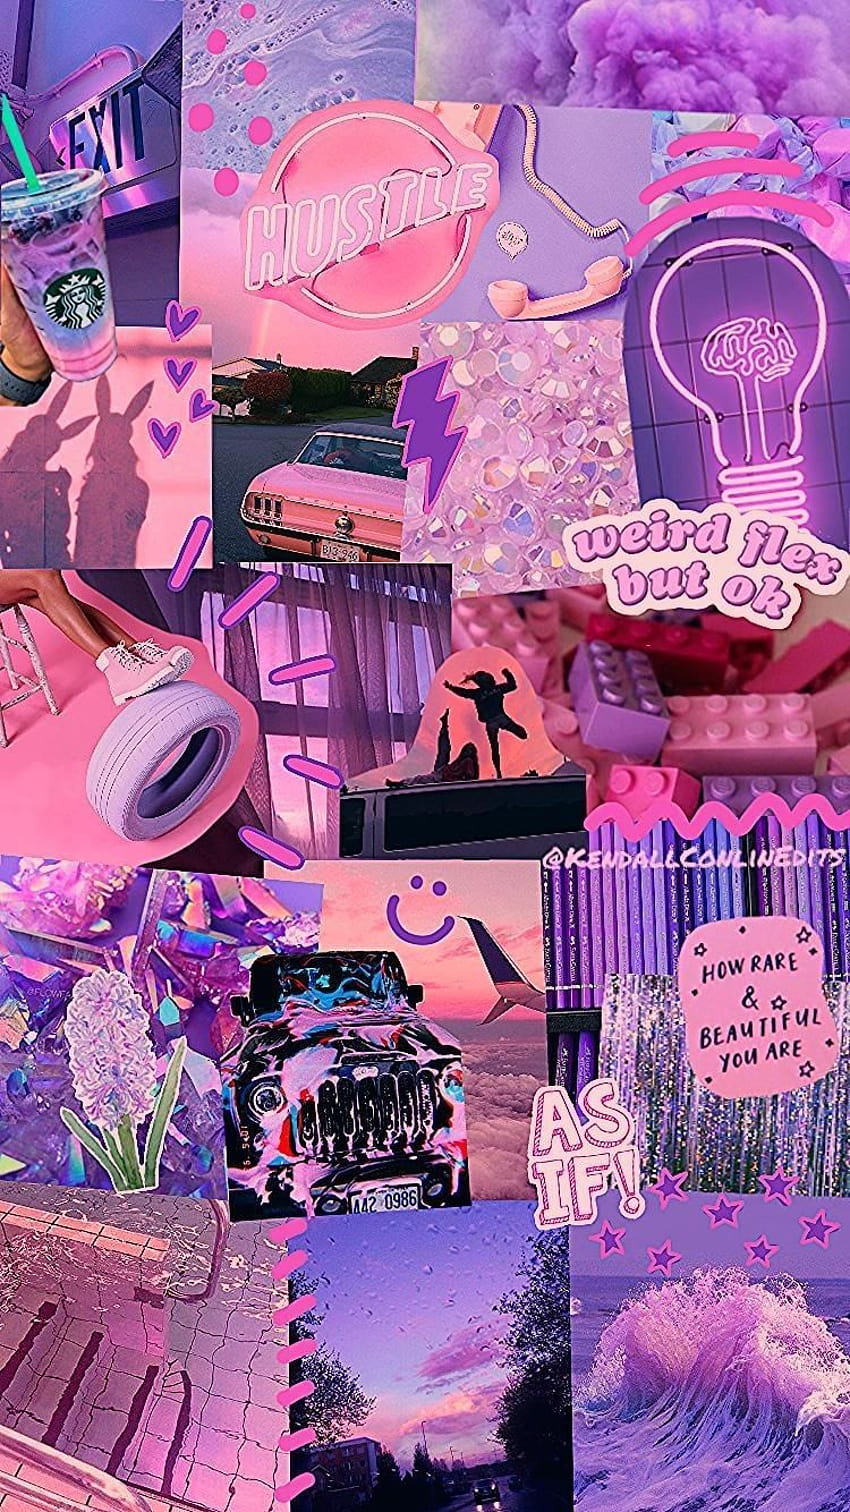 Aesthetic collage background in purple and pink - Pink collage